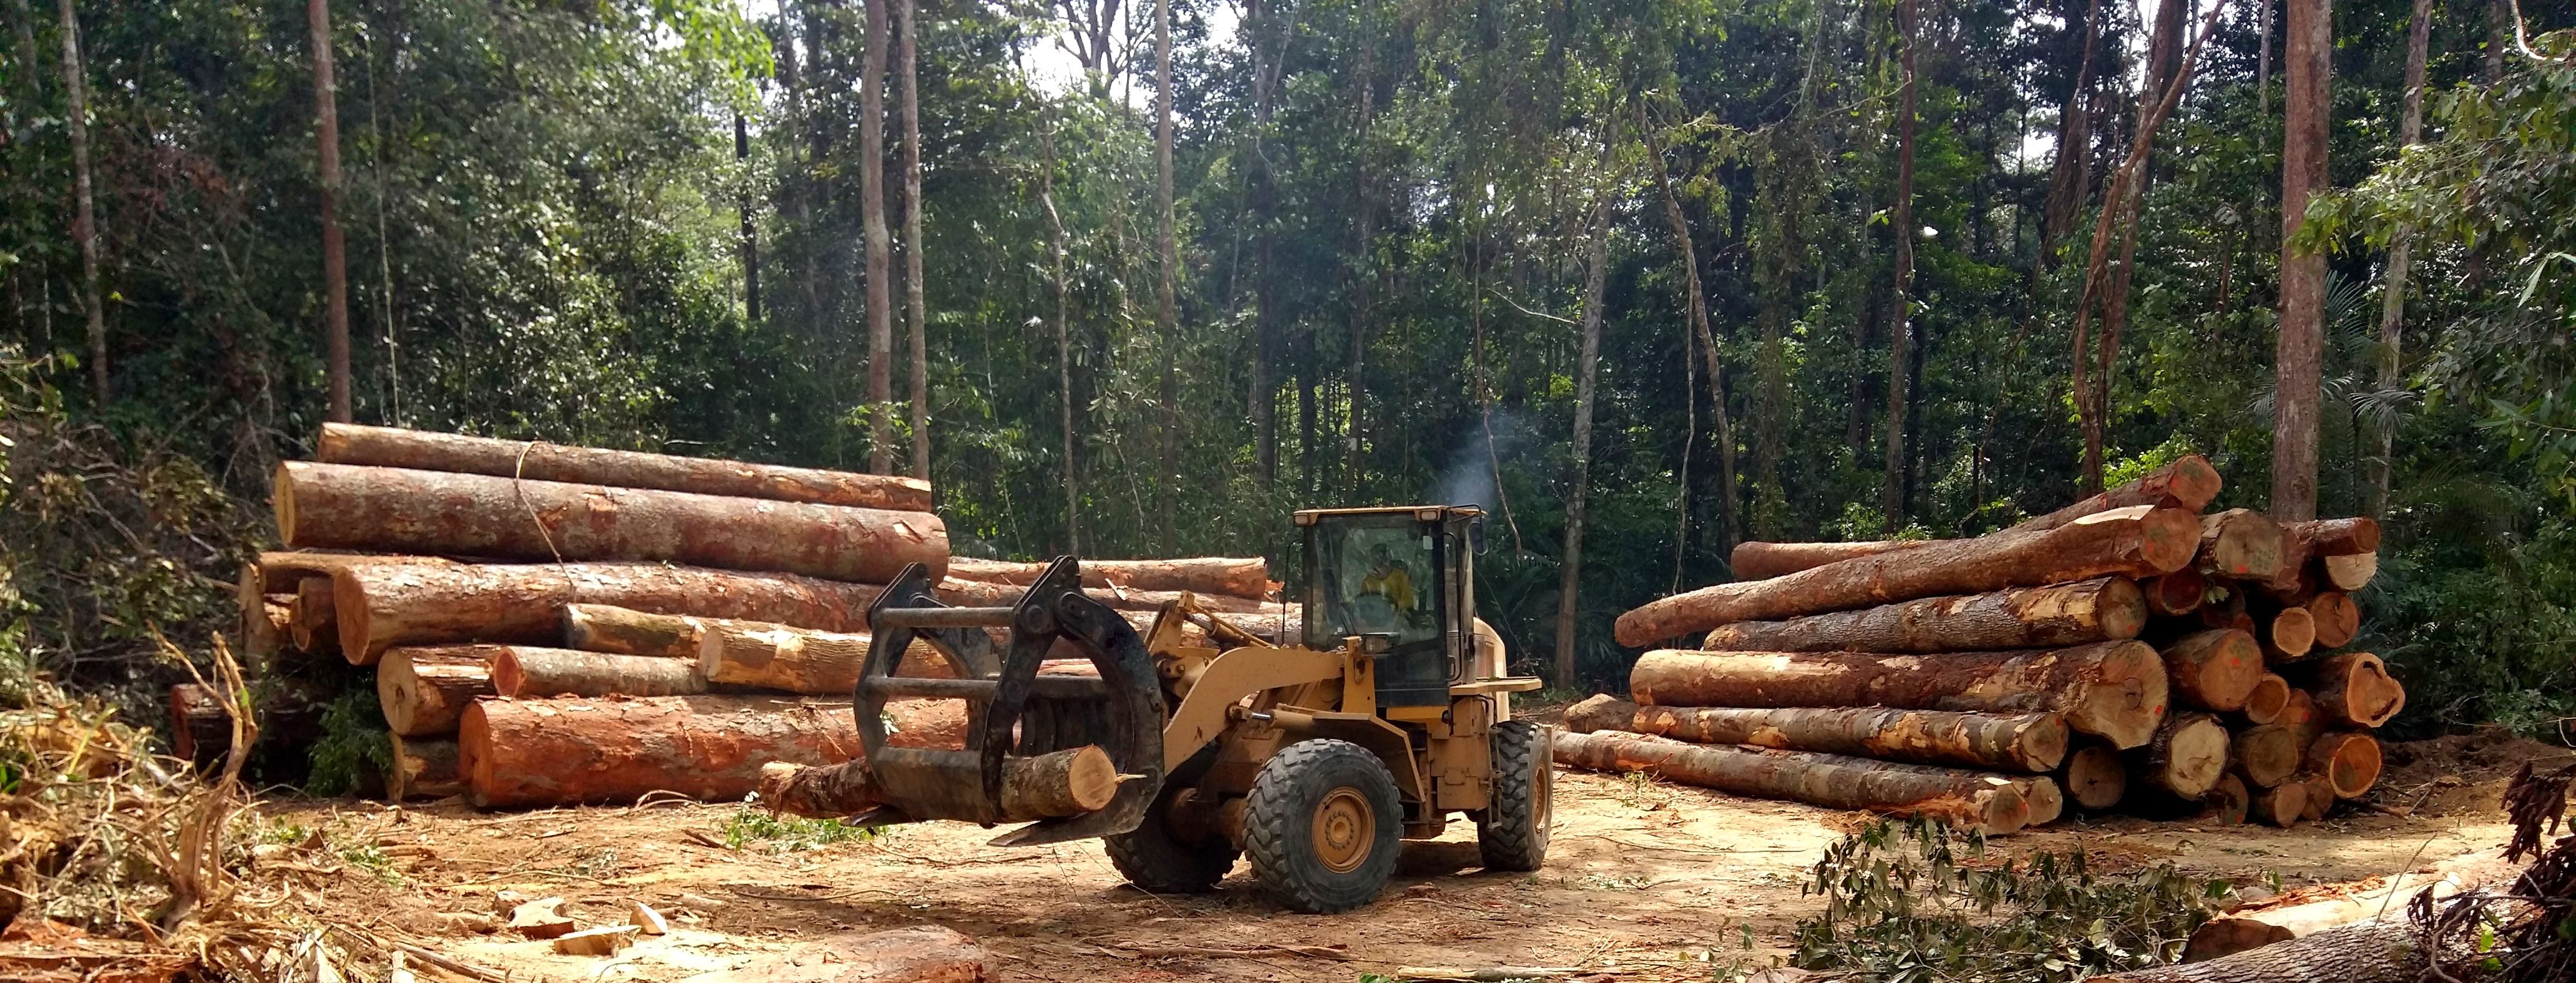 A wheel loader tidying the piles of wood logs extracted from the Amazonian forest. Image by Tarcisio Schnaider / Shutterstock. Brazil, undated.  